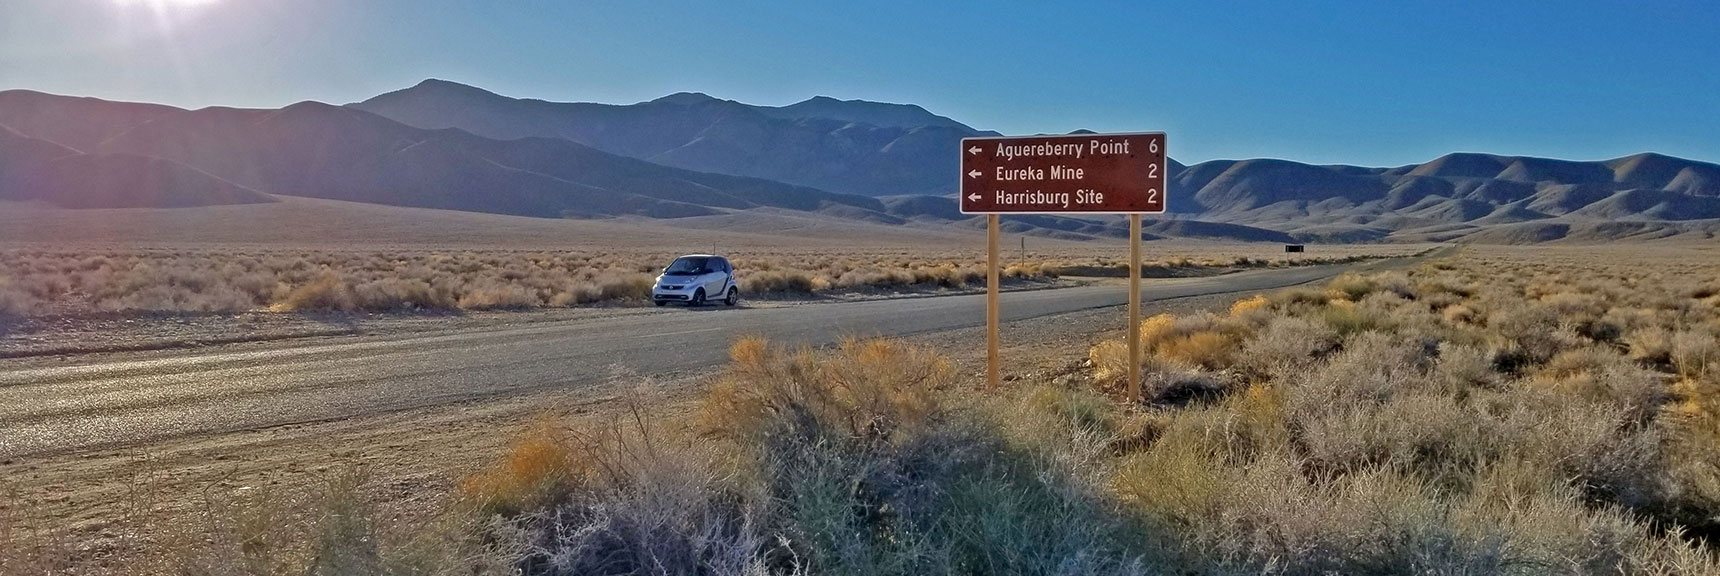 Starting Point at the Intersection of Emigrant Canyon Road and Aguereberry Point Road | Eureka Mine, Harrisburg, Cashier Mill, Death Valley, California